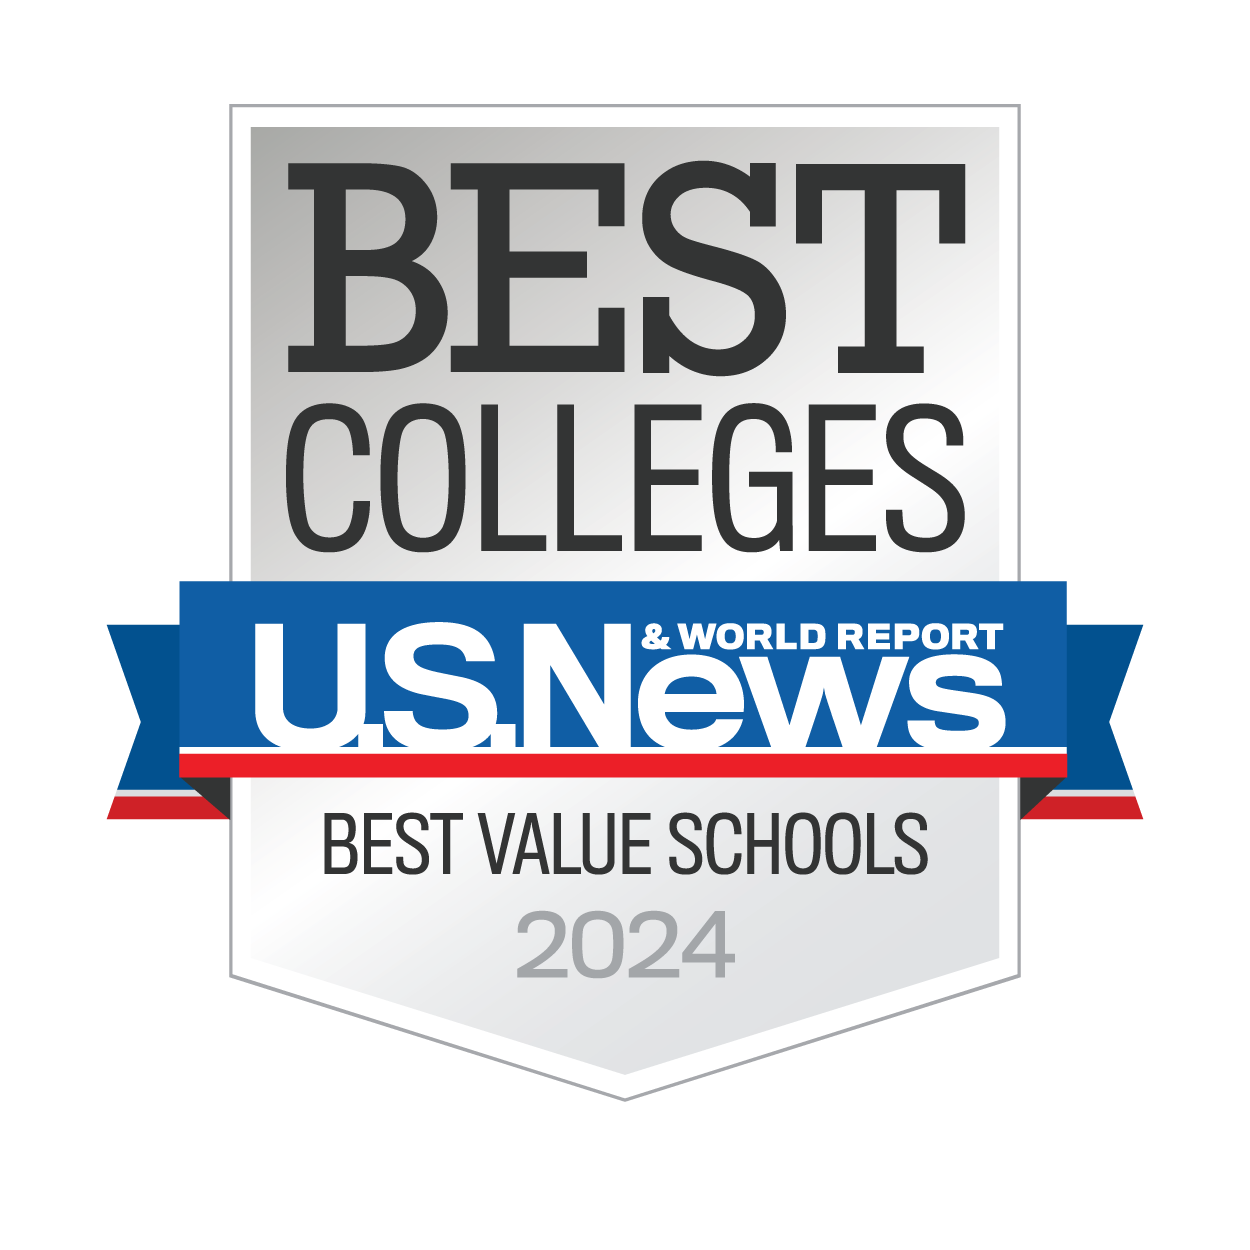 Best Colleges U.S. News and World Report - Best Value Schools 2024